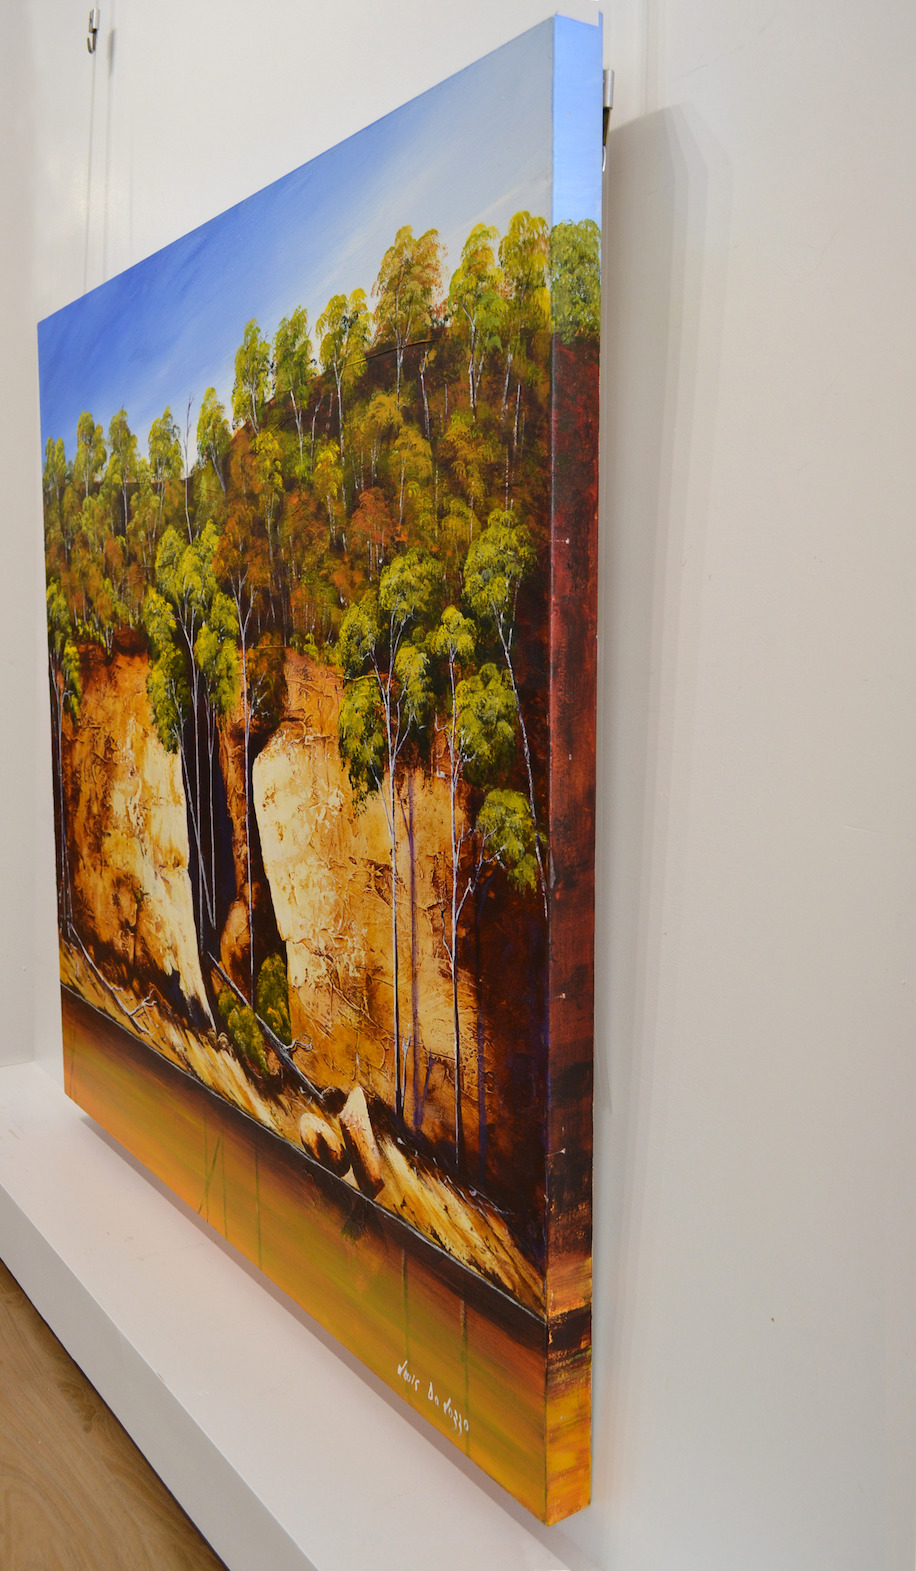 Side View Of Landscape Painting "Shoalhaven Riverbank" By Louis Dalozzo